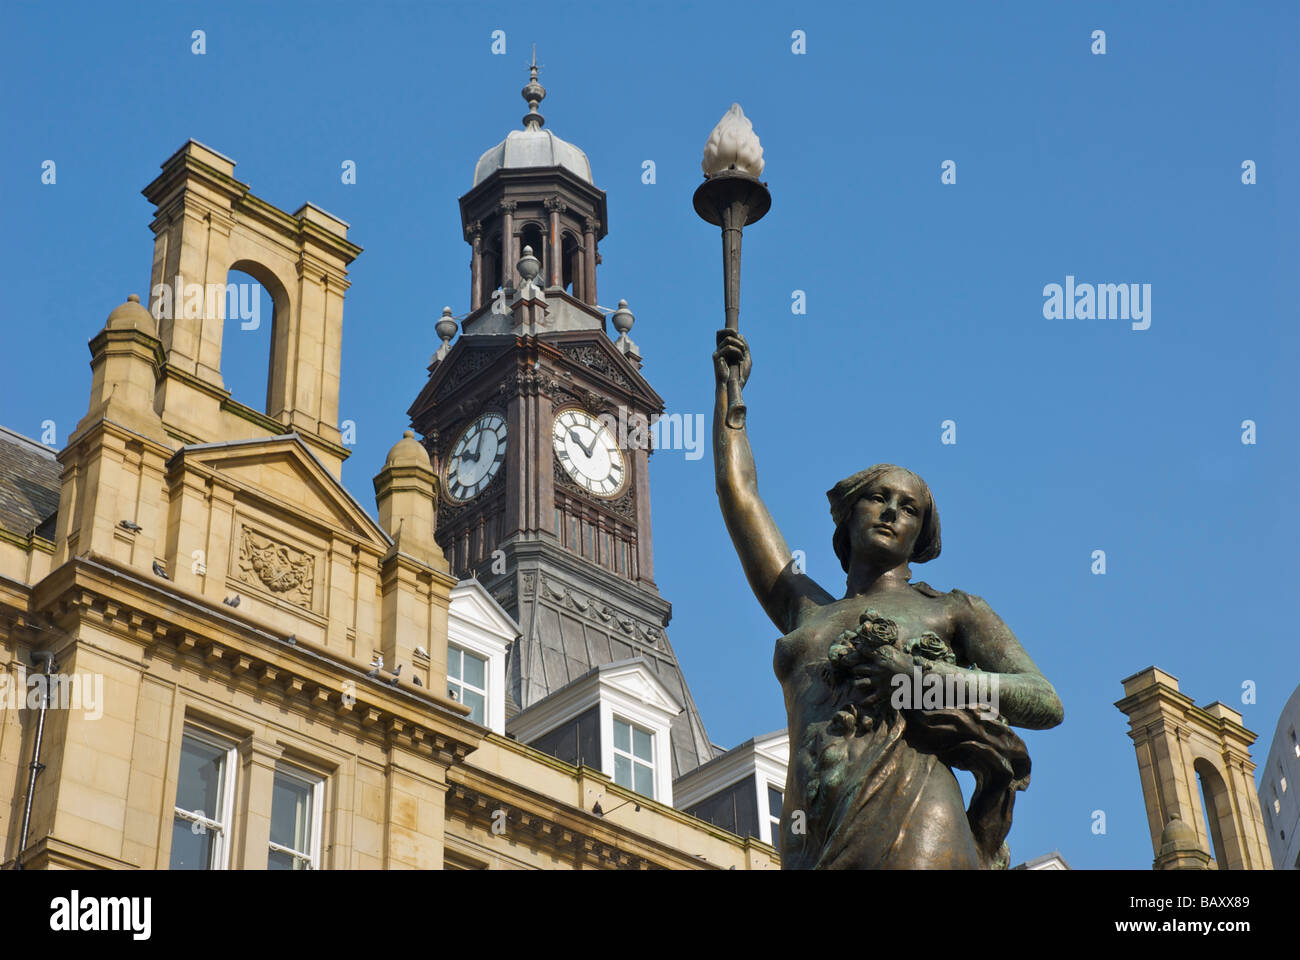 One of the eight nymph sculptures in City Square, Leeds, West Yorkshire, England Stock Photo